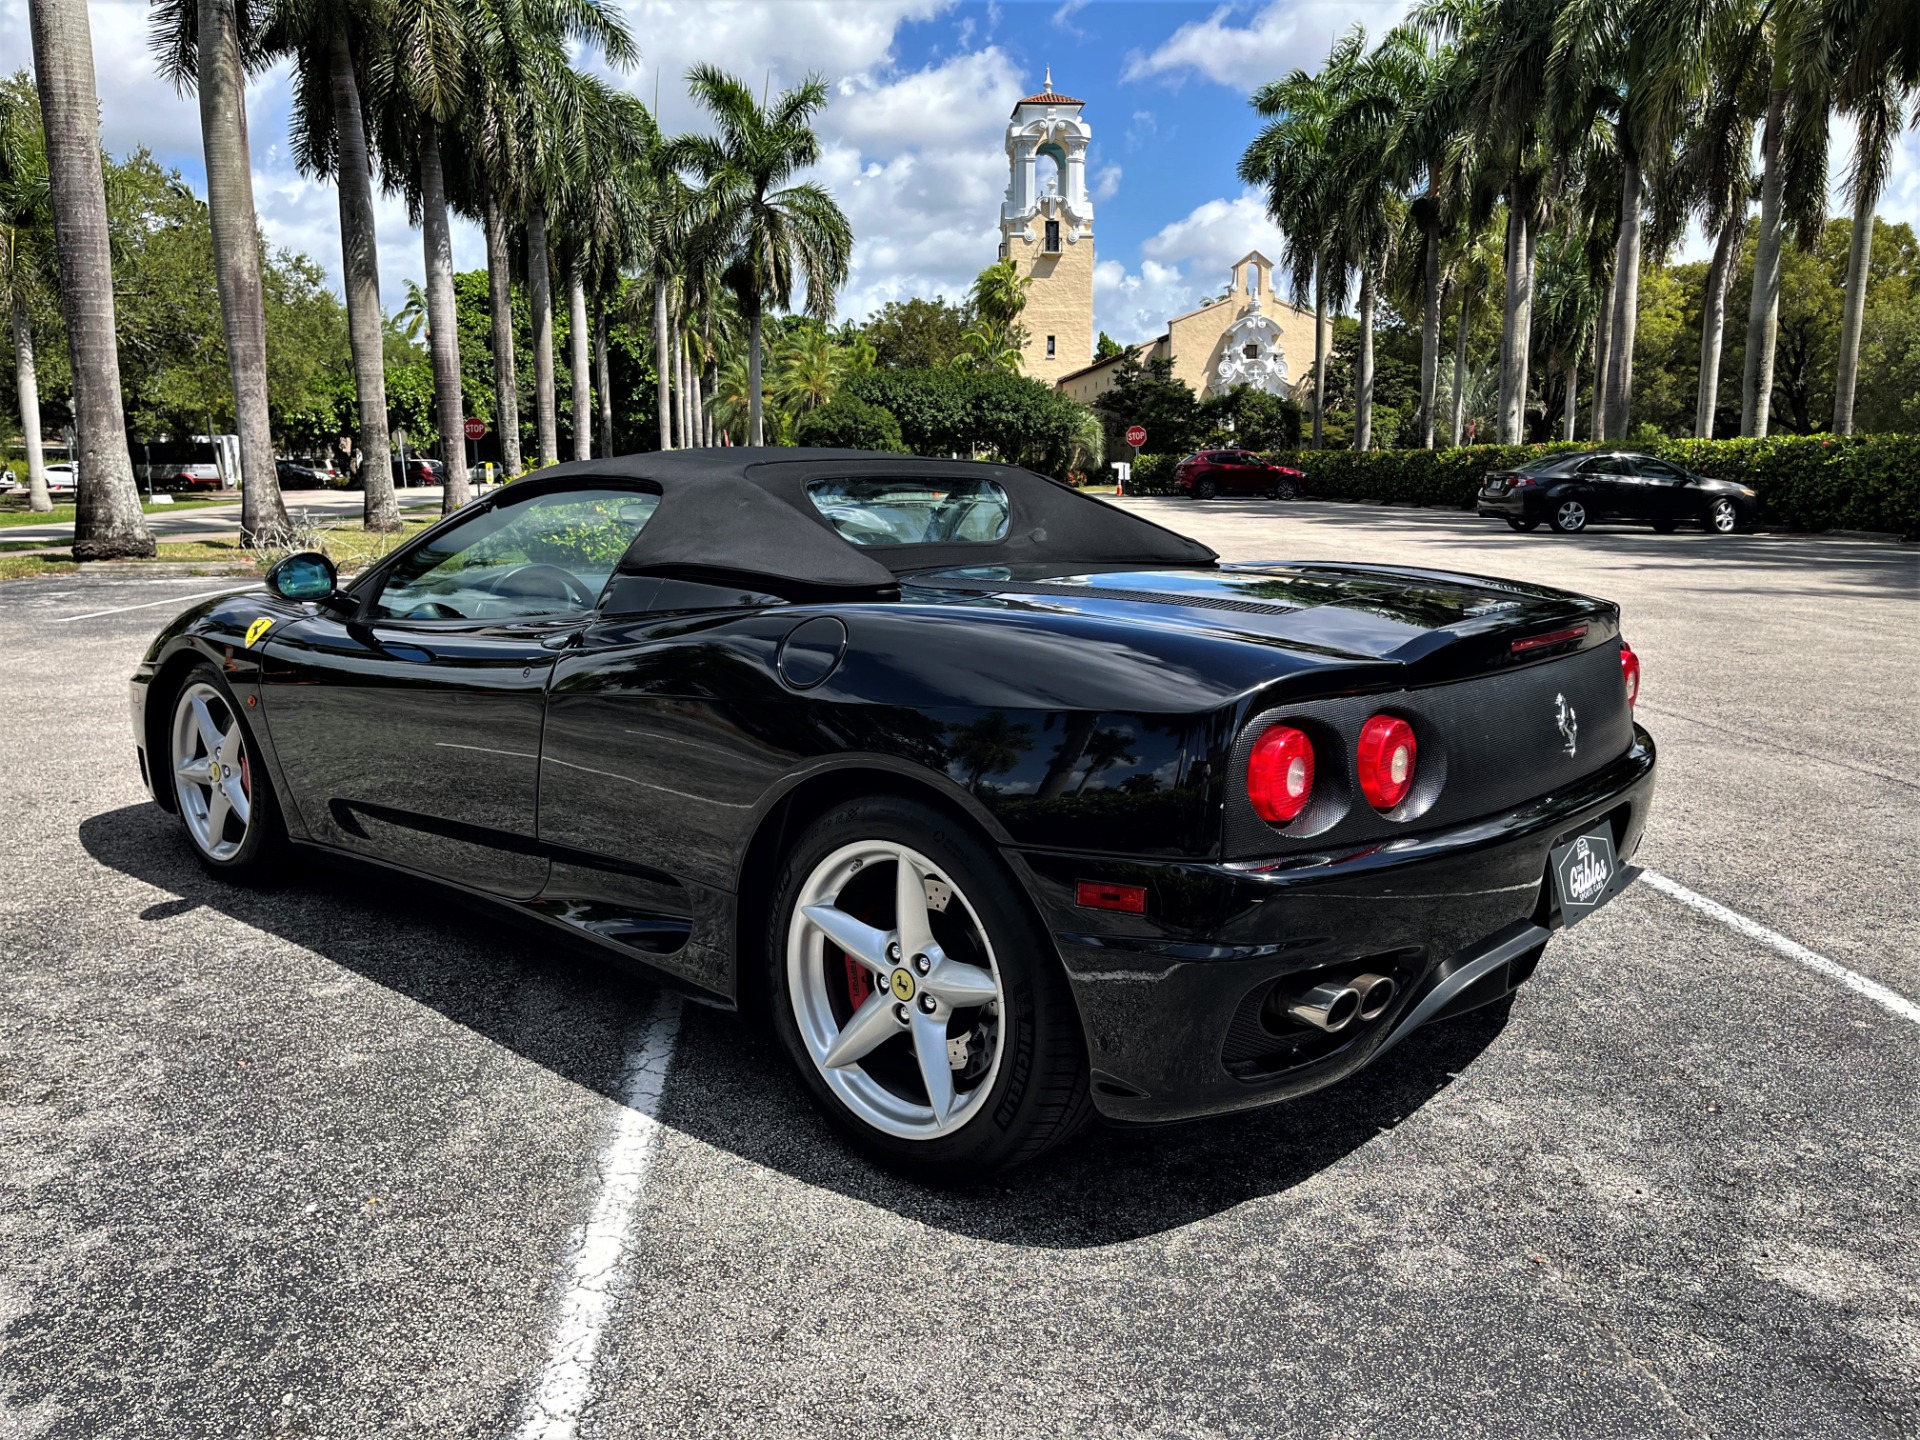 Used 2003 Ferrari 360 Spider for sale $74,850 at The Gables Sports Cars in Miami FL 33146 4